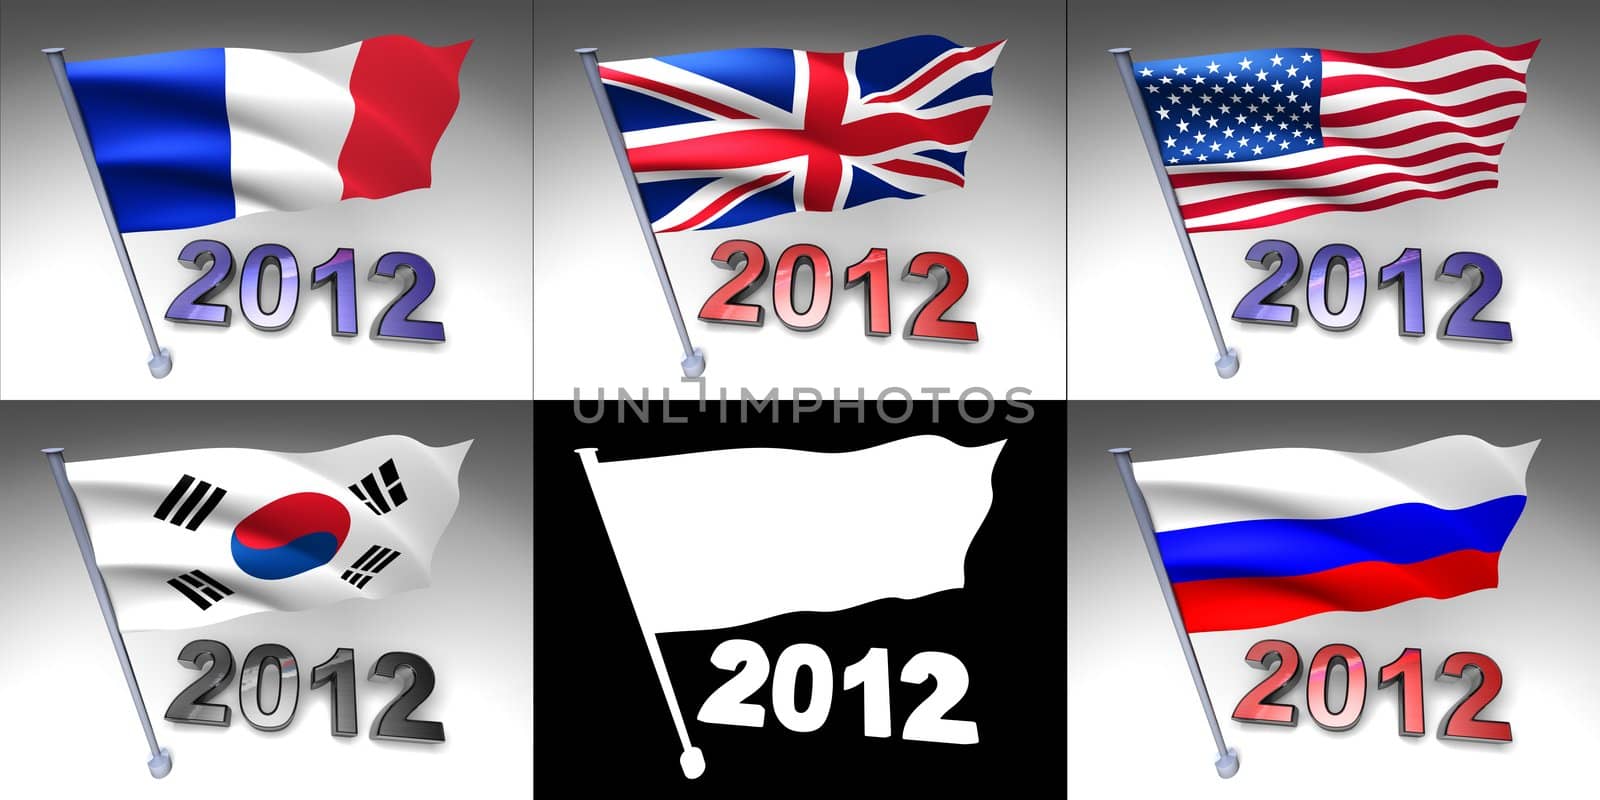 Five flags on a pole with 2012 design at bottom by shkyo30